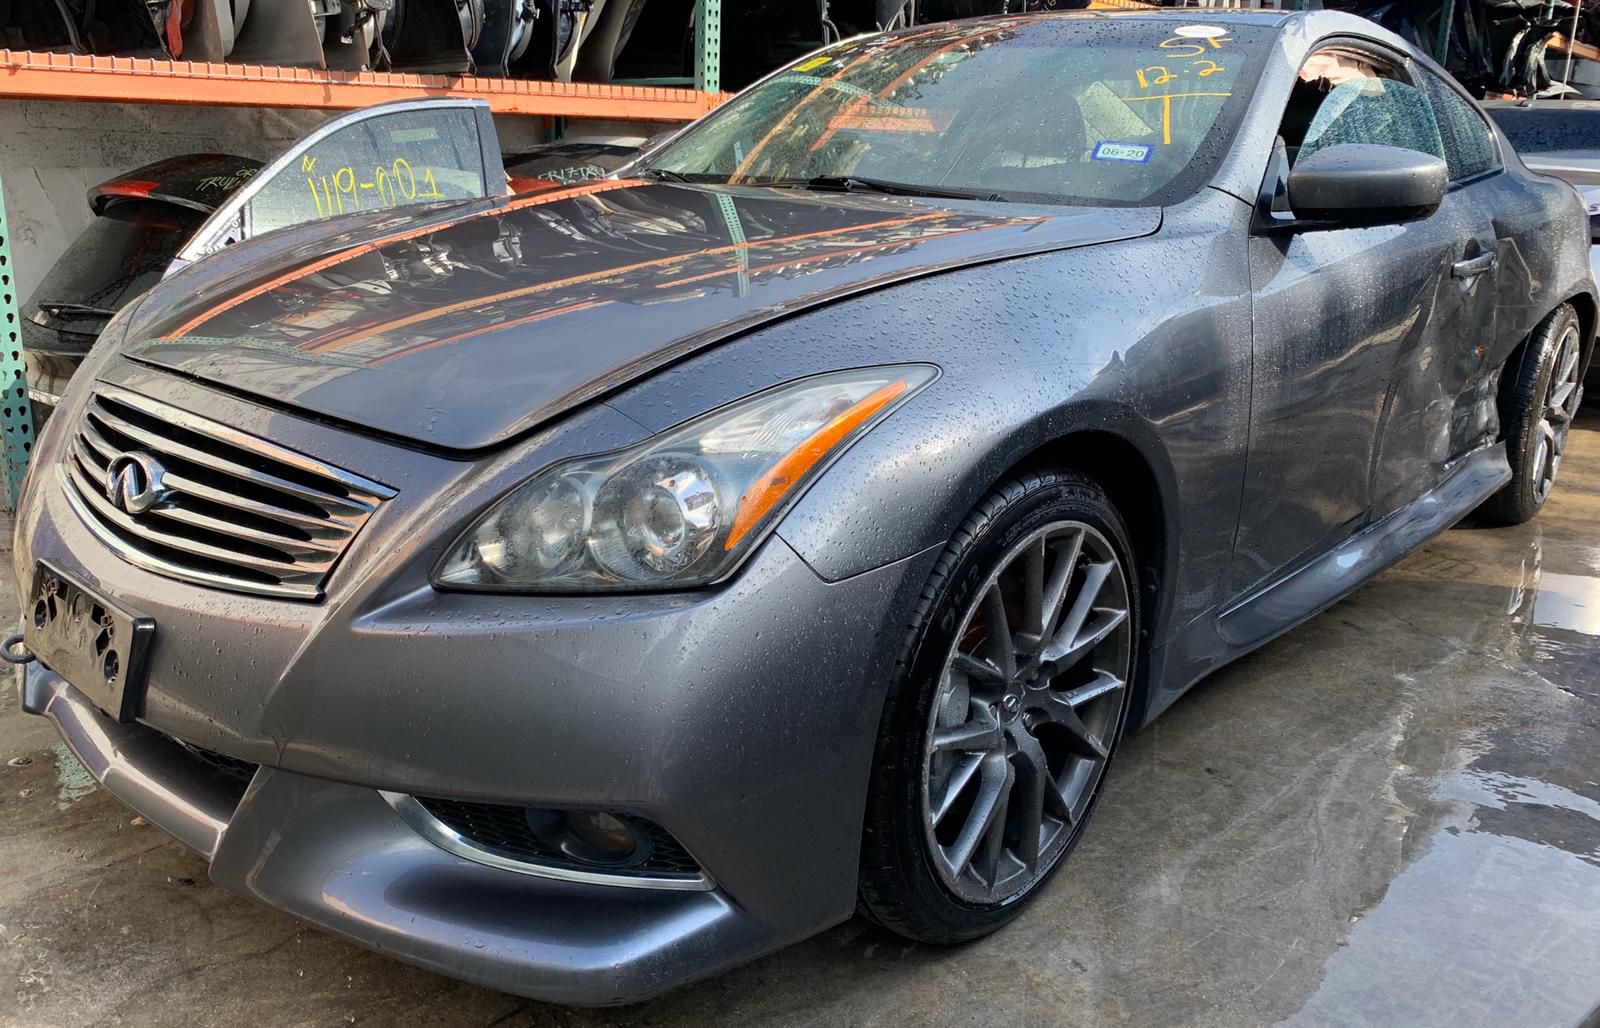 2008 - 2016 INFINITI G37 Q60 COUPE PART OUT!